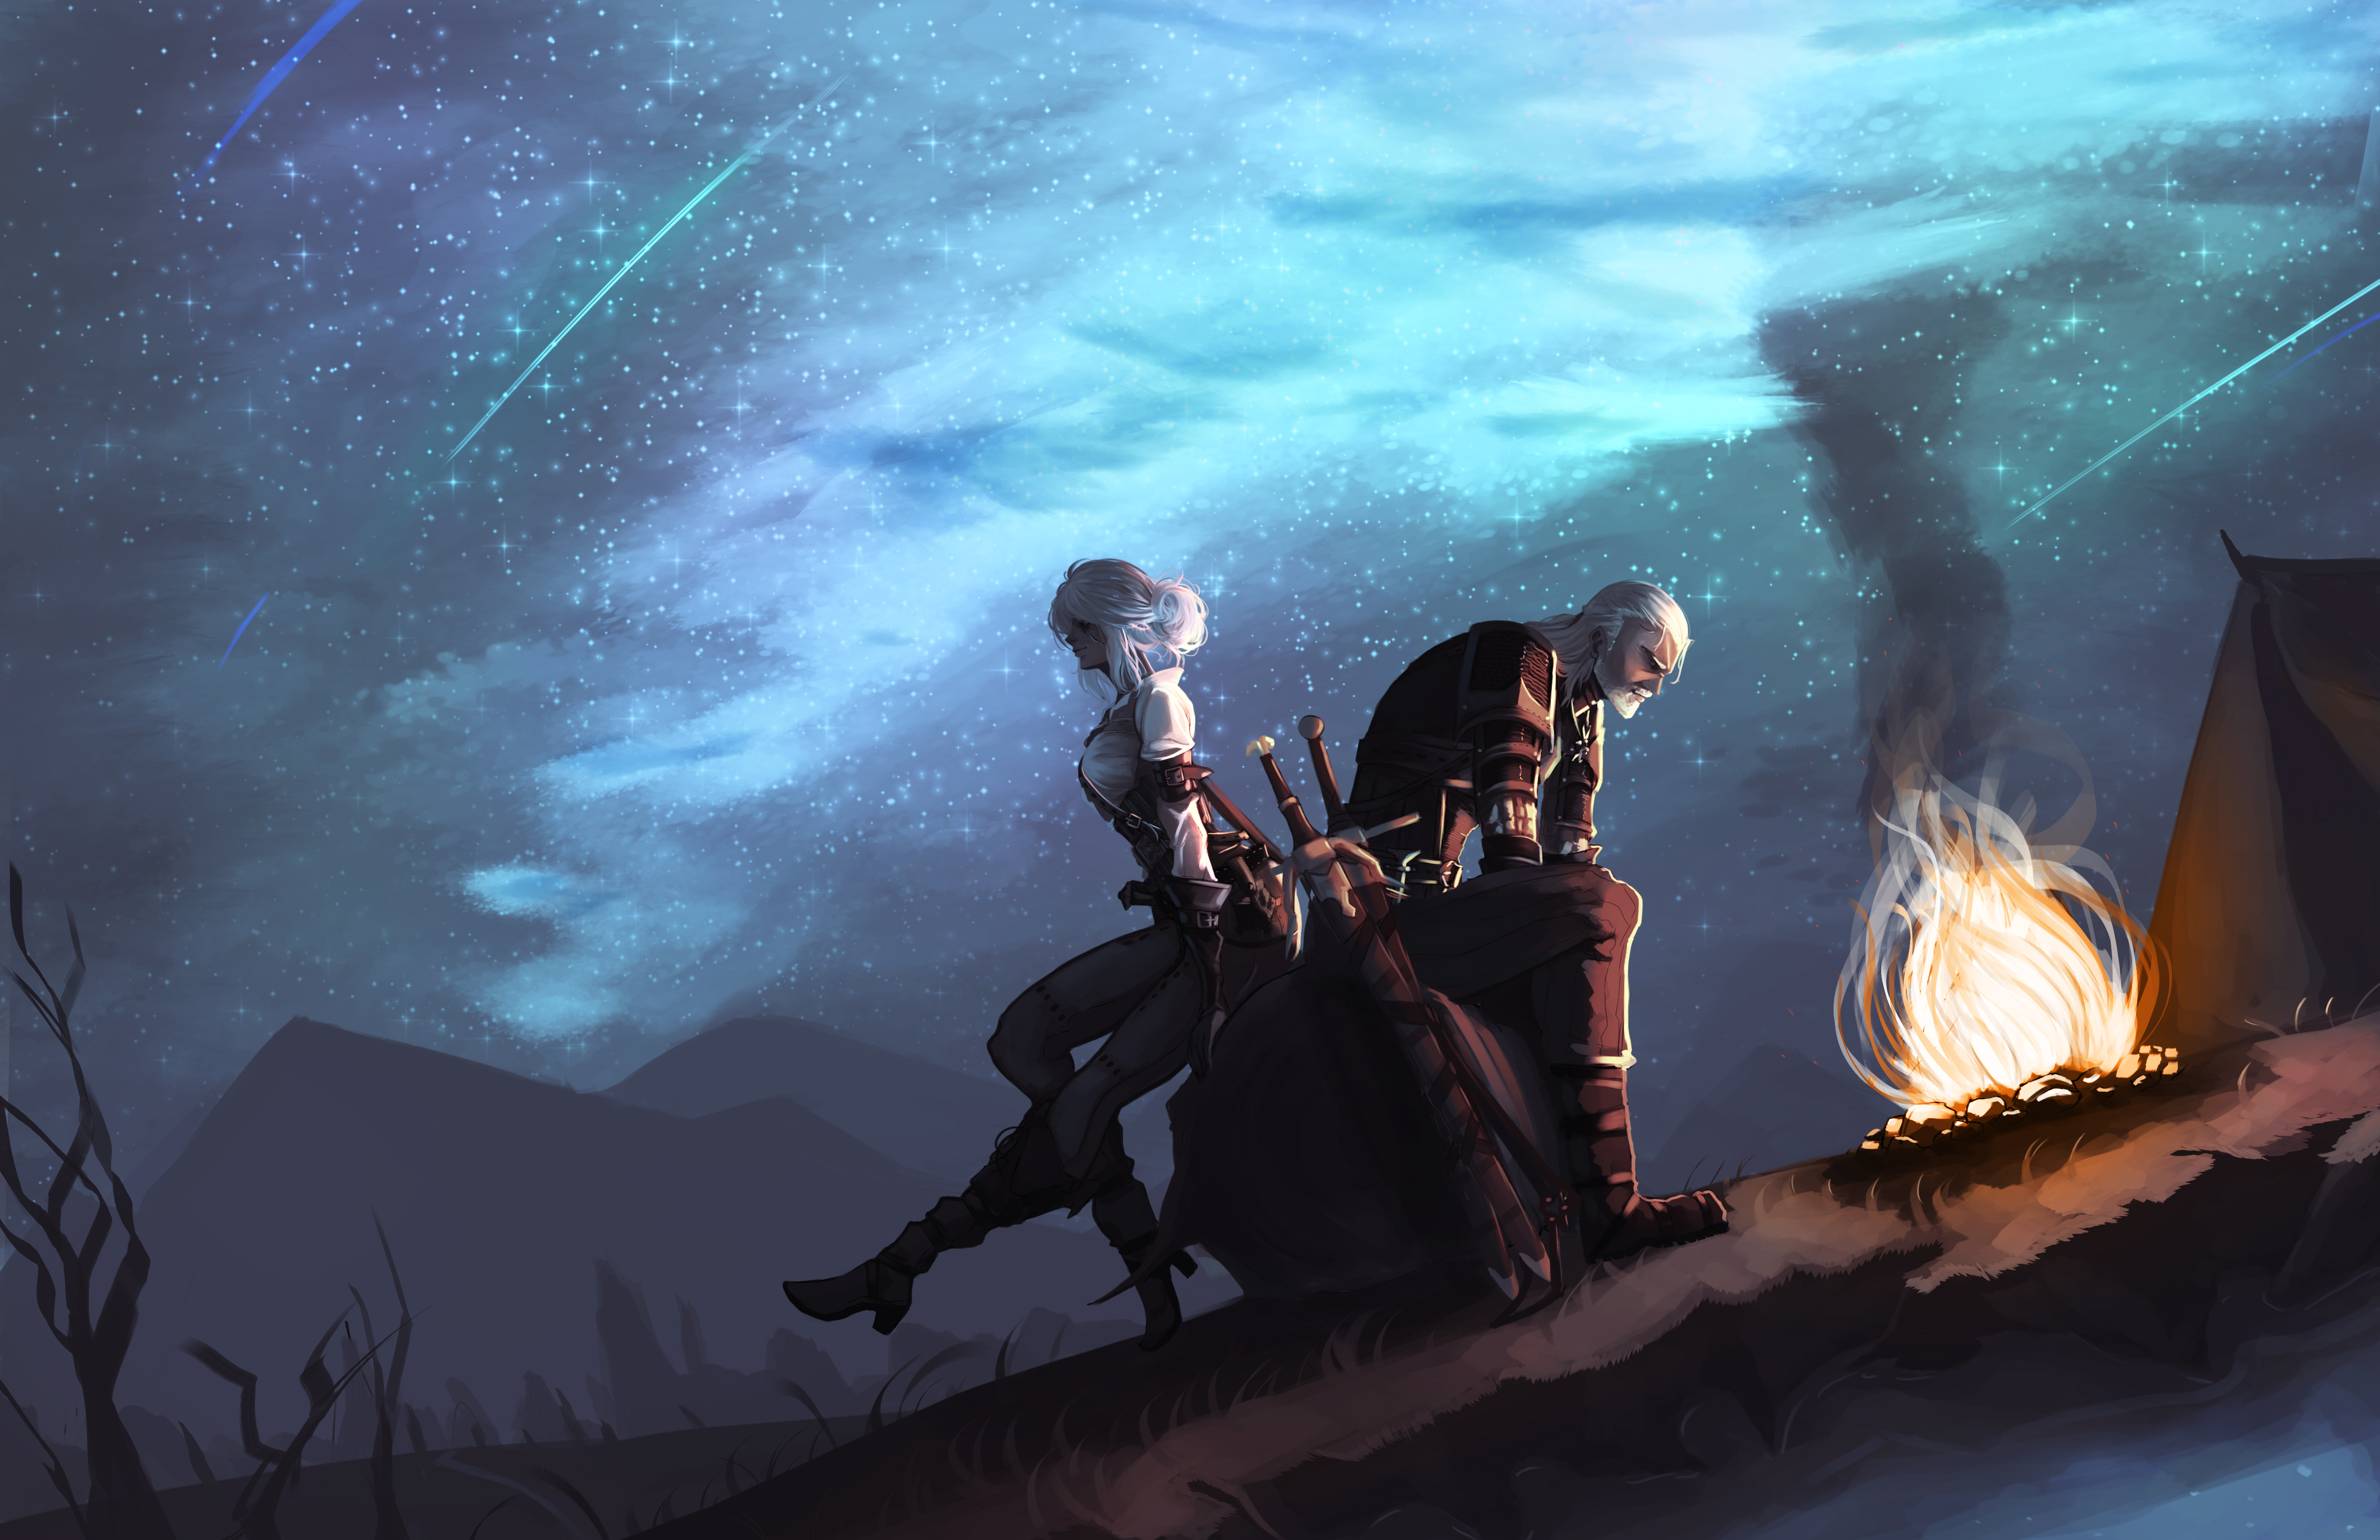 the witcher 3: wild hunt, the witcher, video game, bonfire, ciri (the witcher), geralt of rivia, night